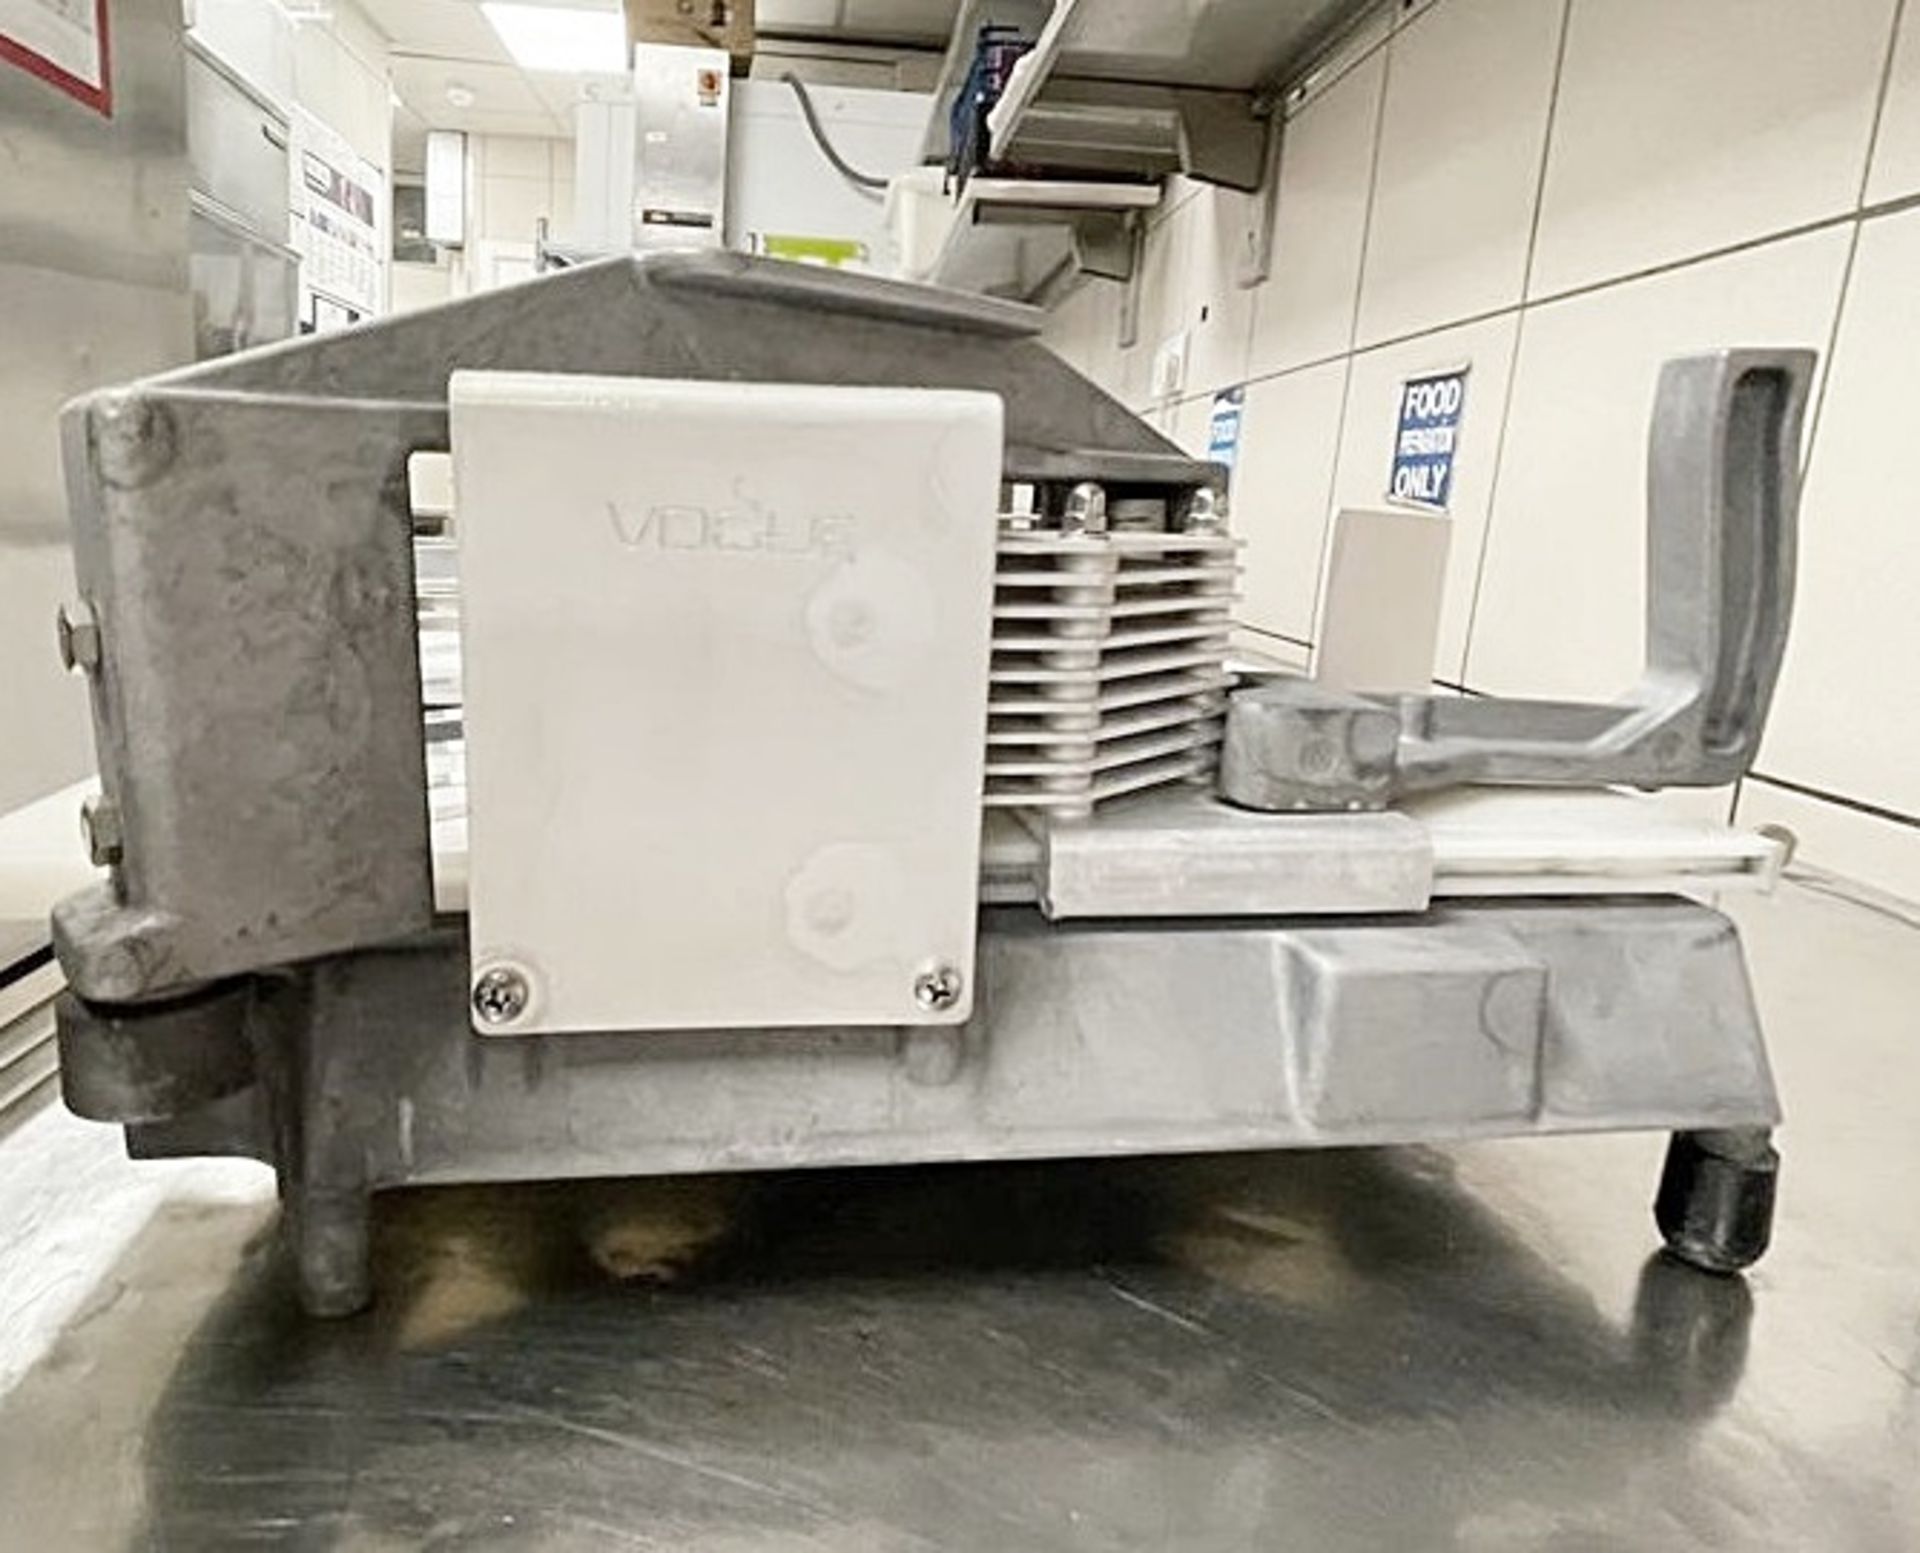 3 x Assorted Commercial Vegitable Slicers / Choppers - More Information To Follow - Ref: FPSD178 - - Image 4 of 4